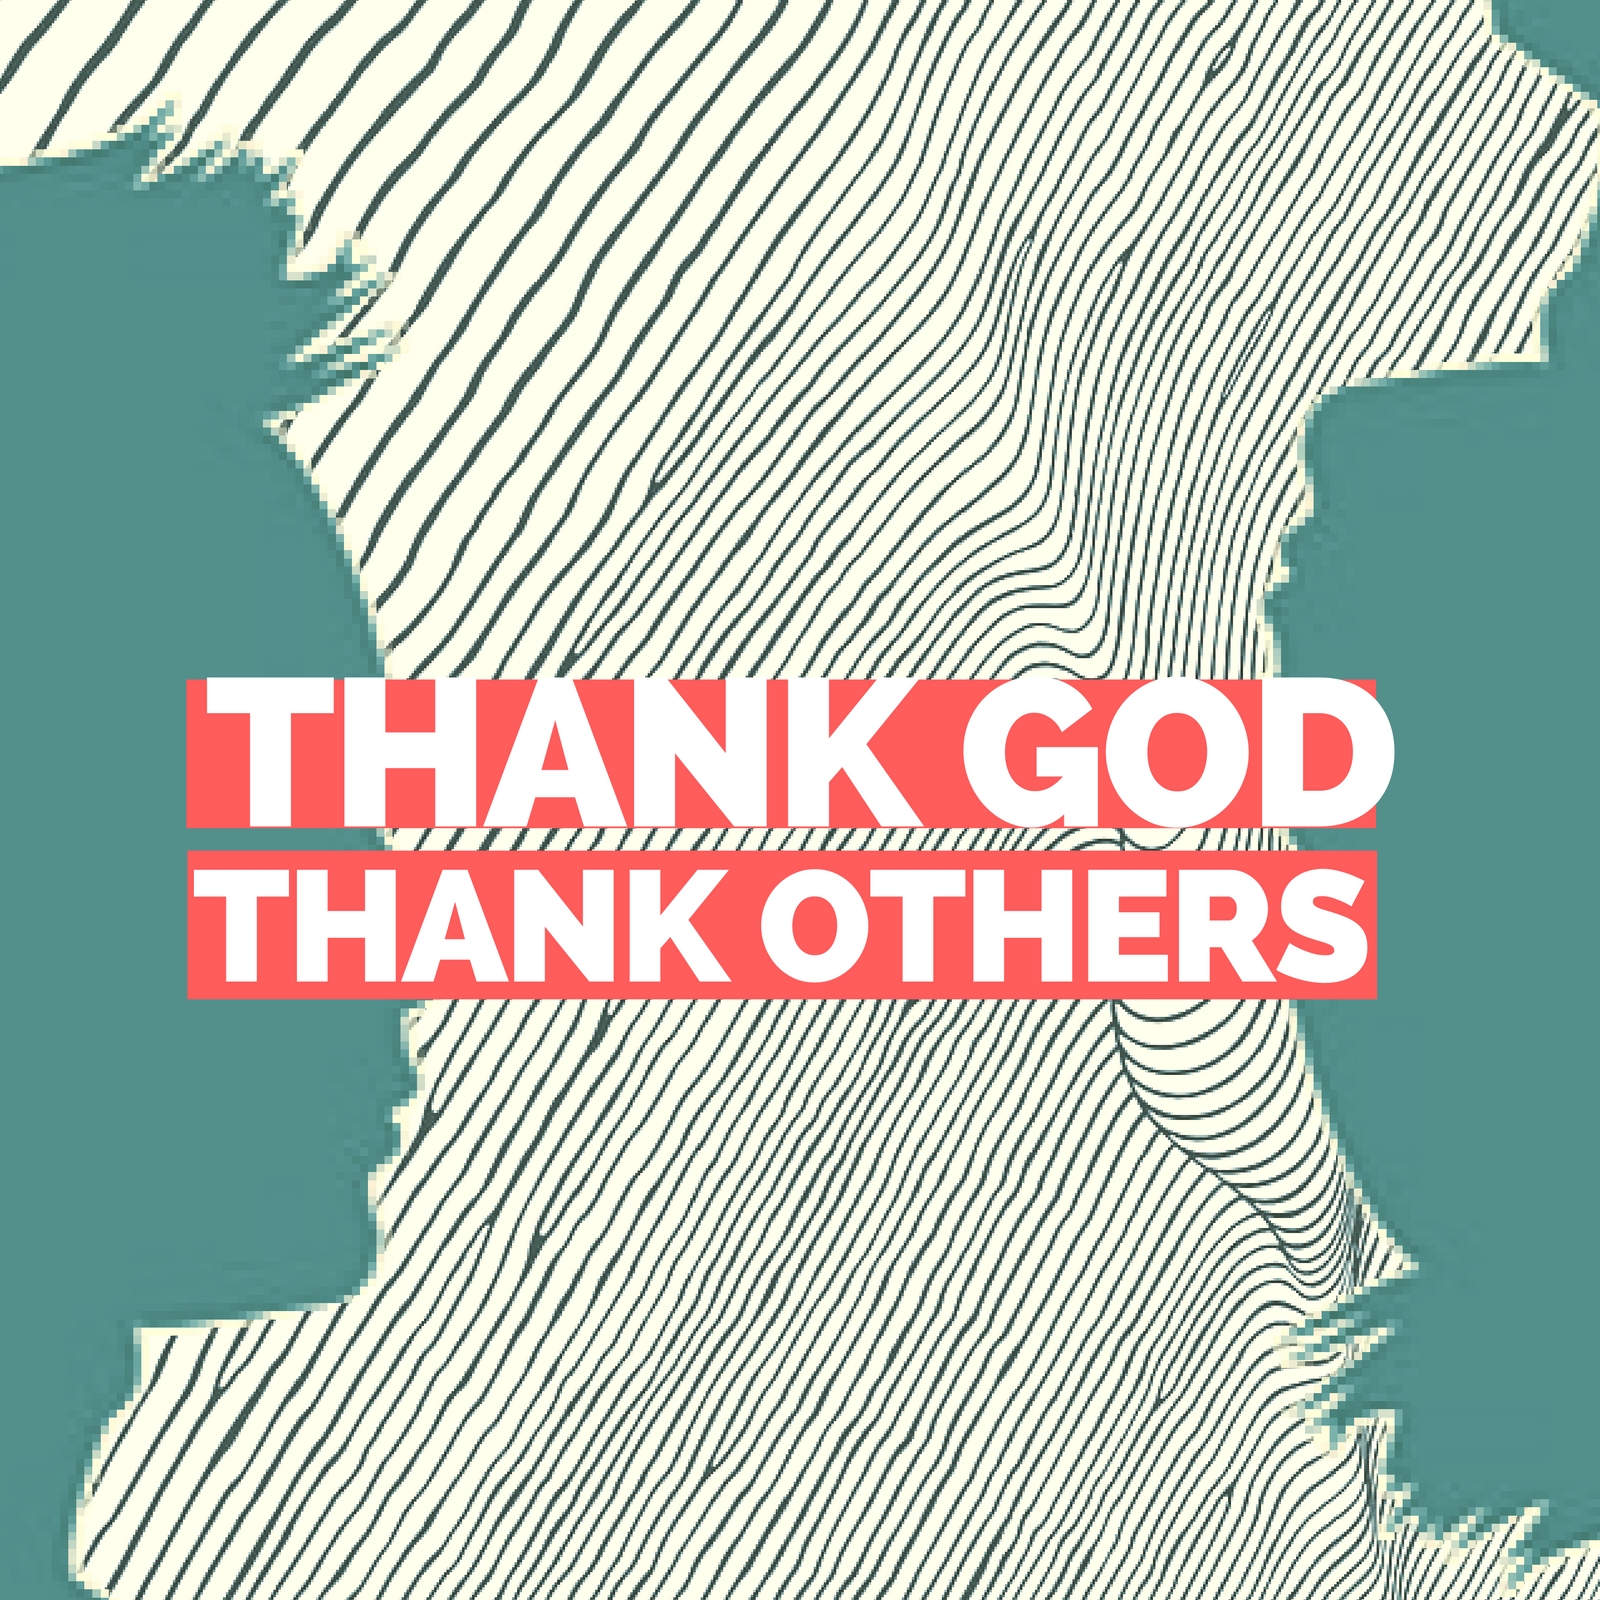 Thank Others